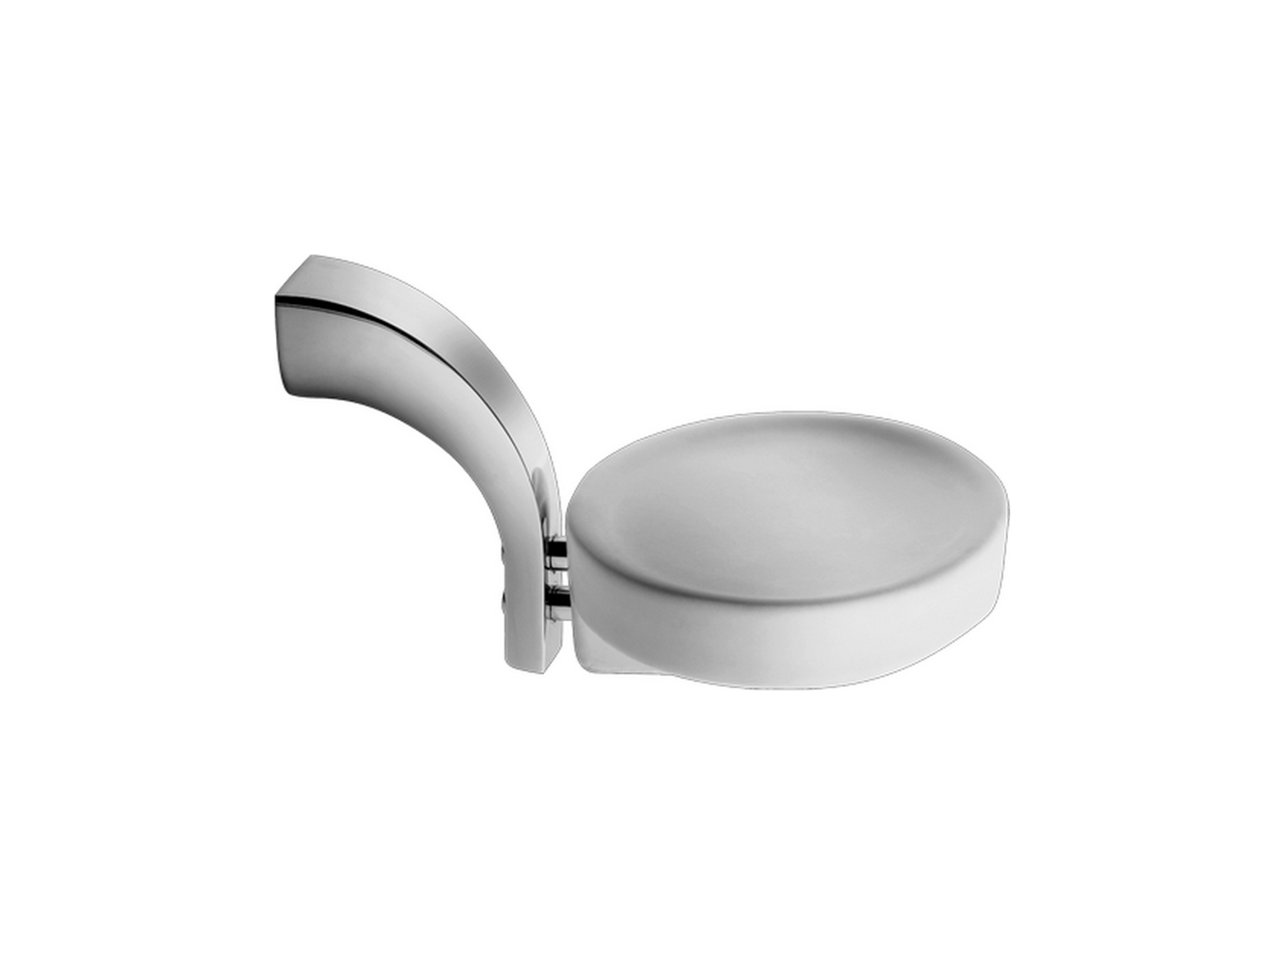 CisalWall mounted soap-dish BATHROOM ACCESSORIES_AE090600